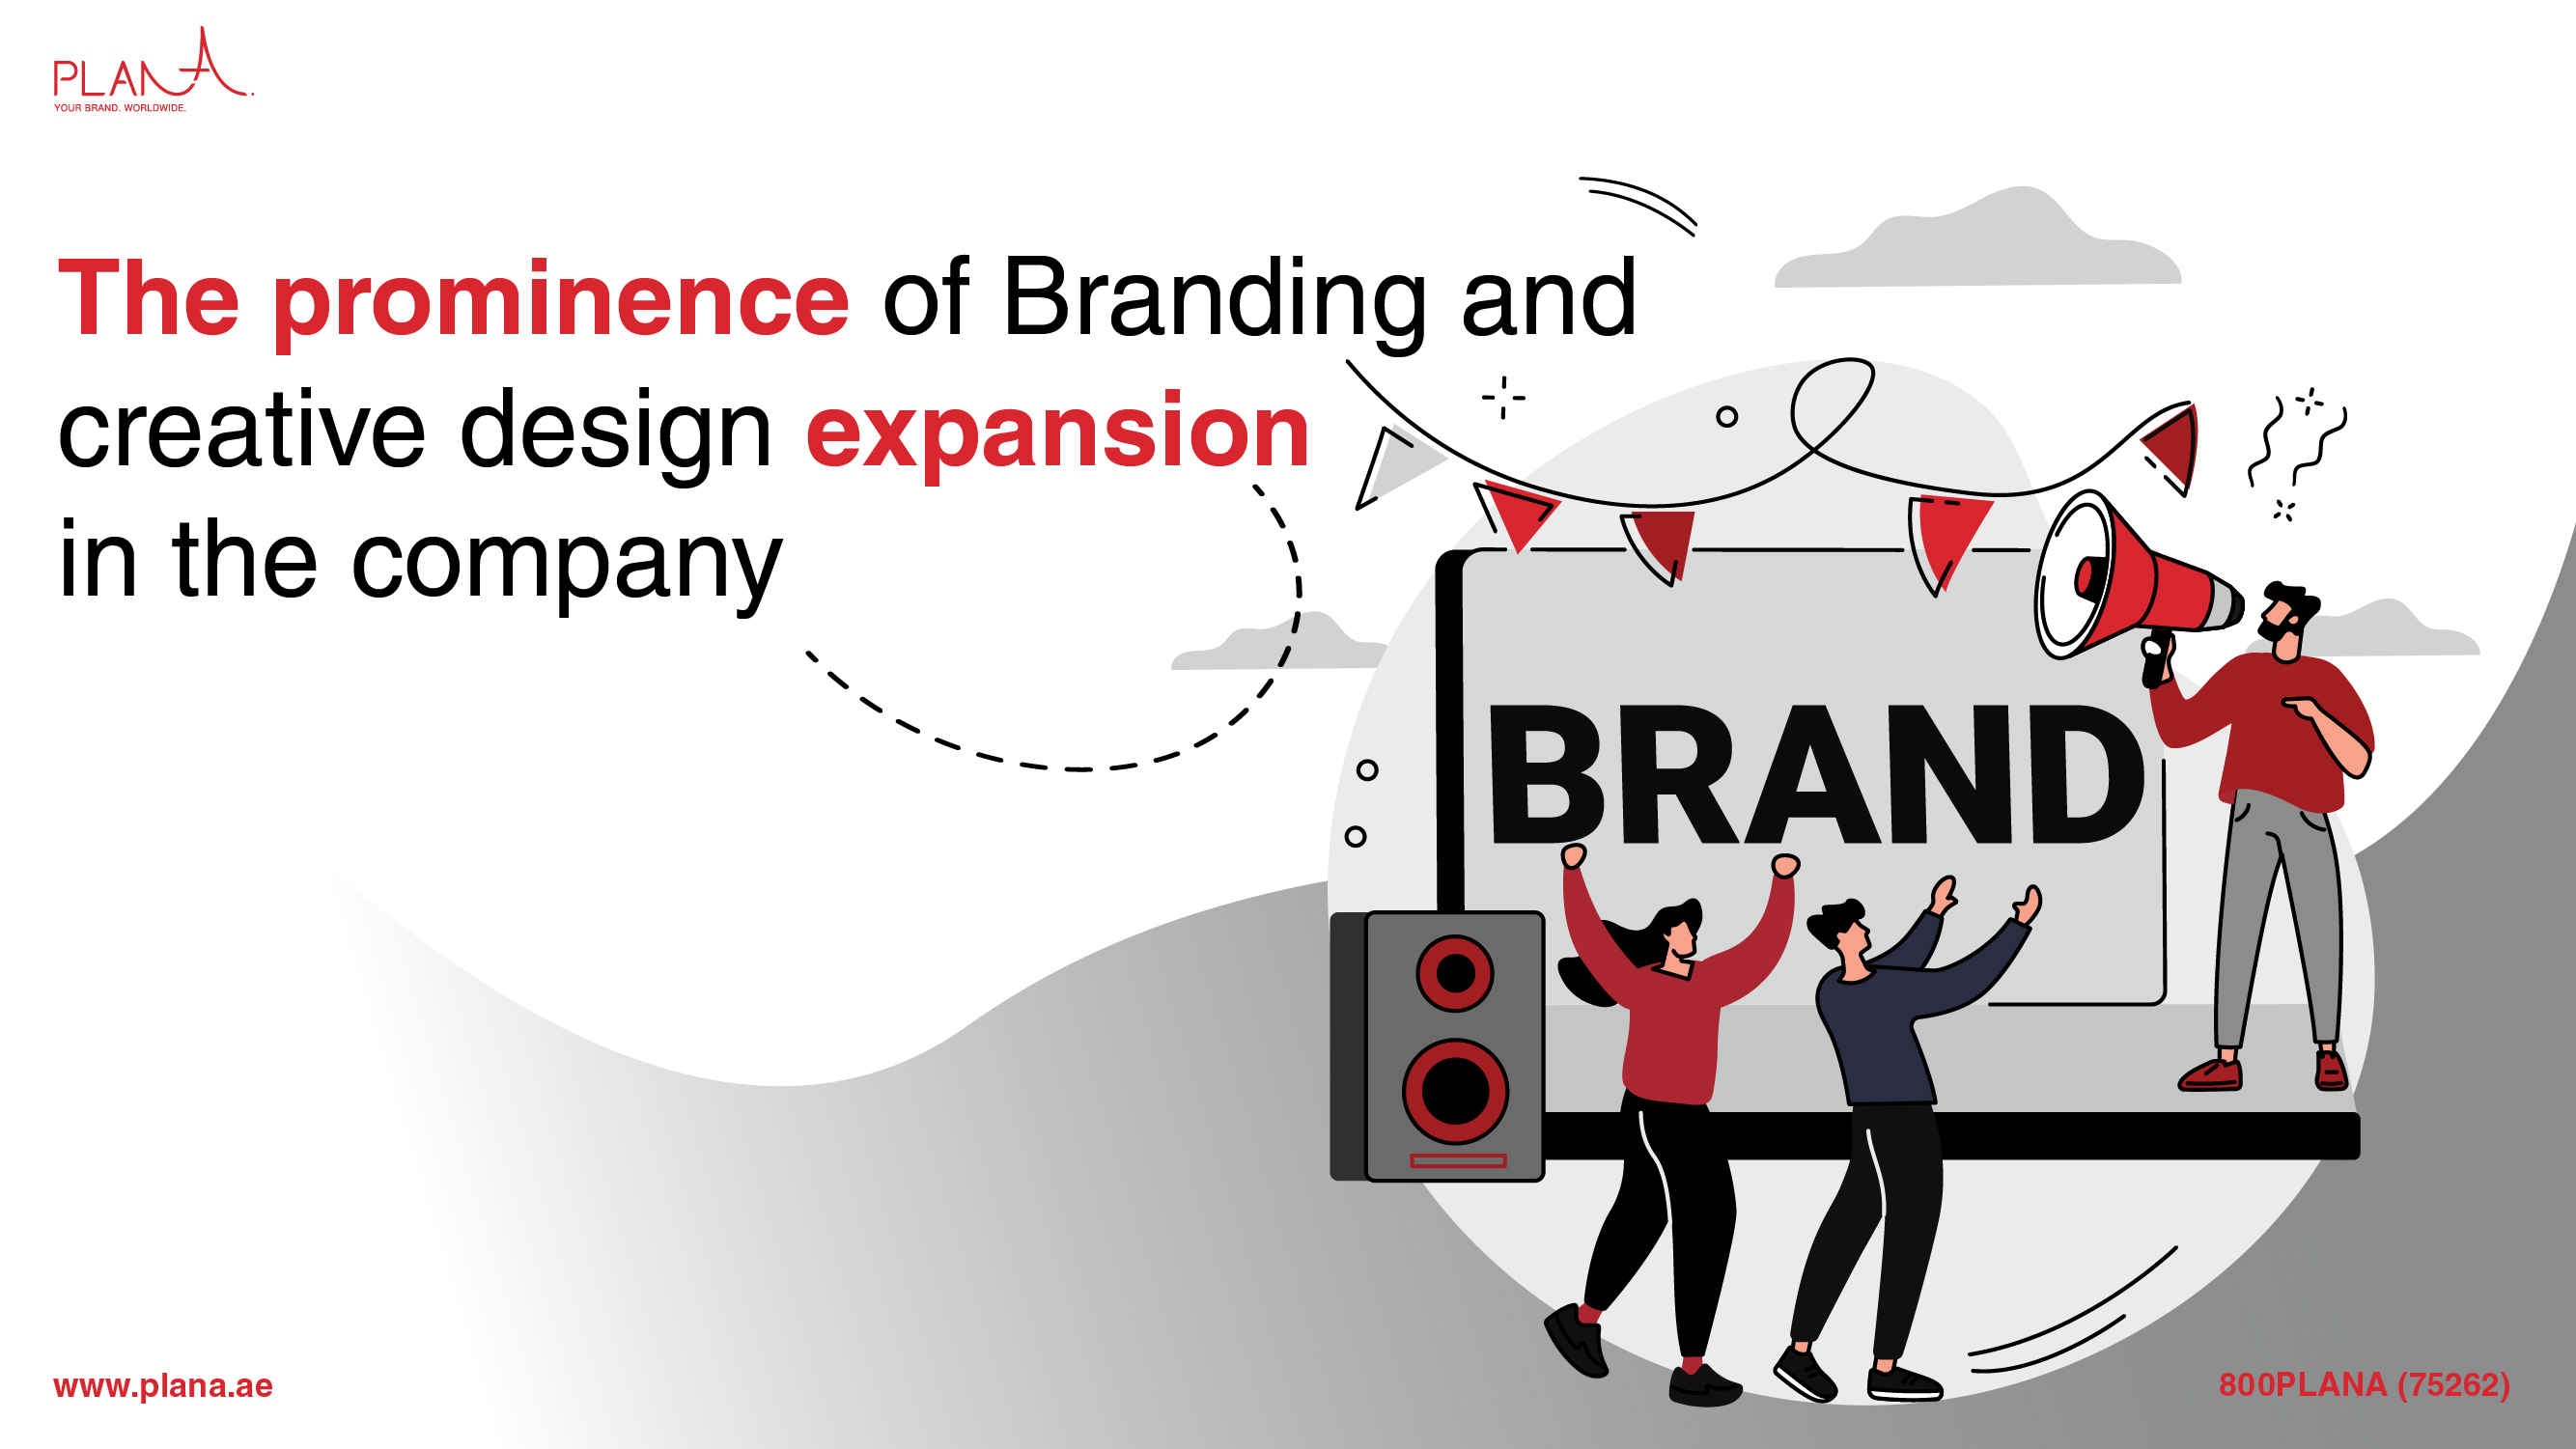 The Prominence of Branding and Creative Design Expansion in the Company